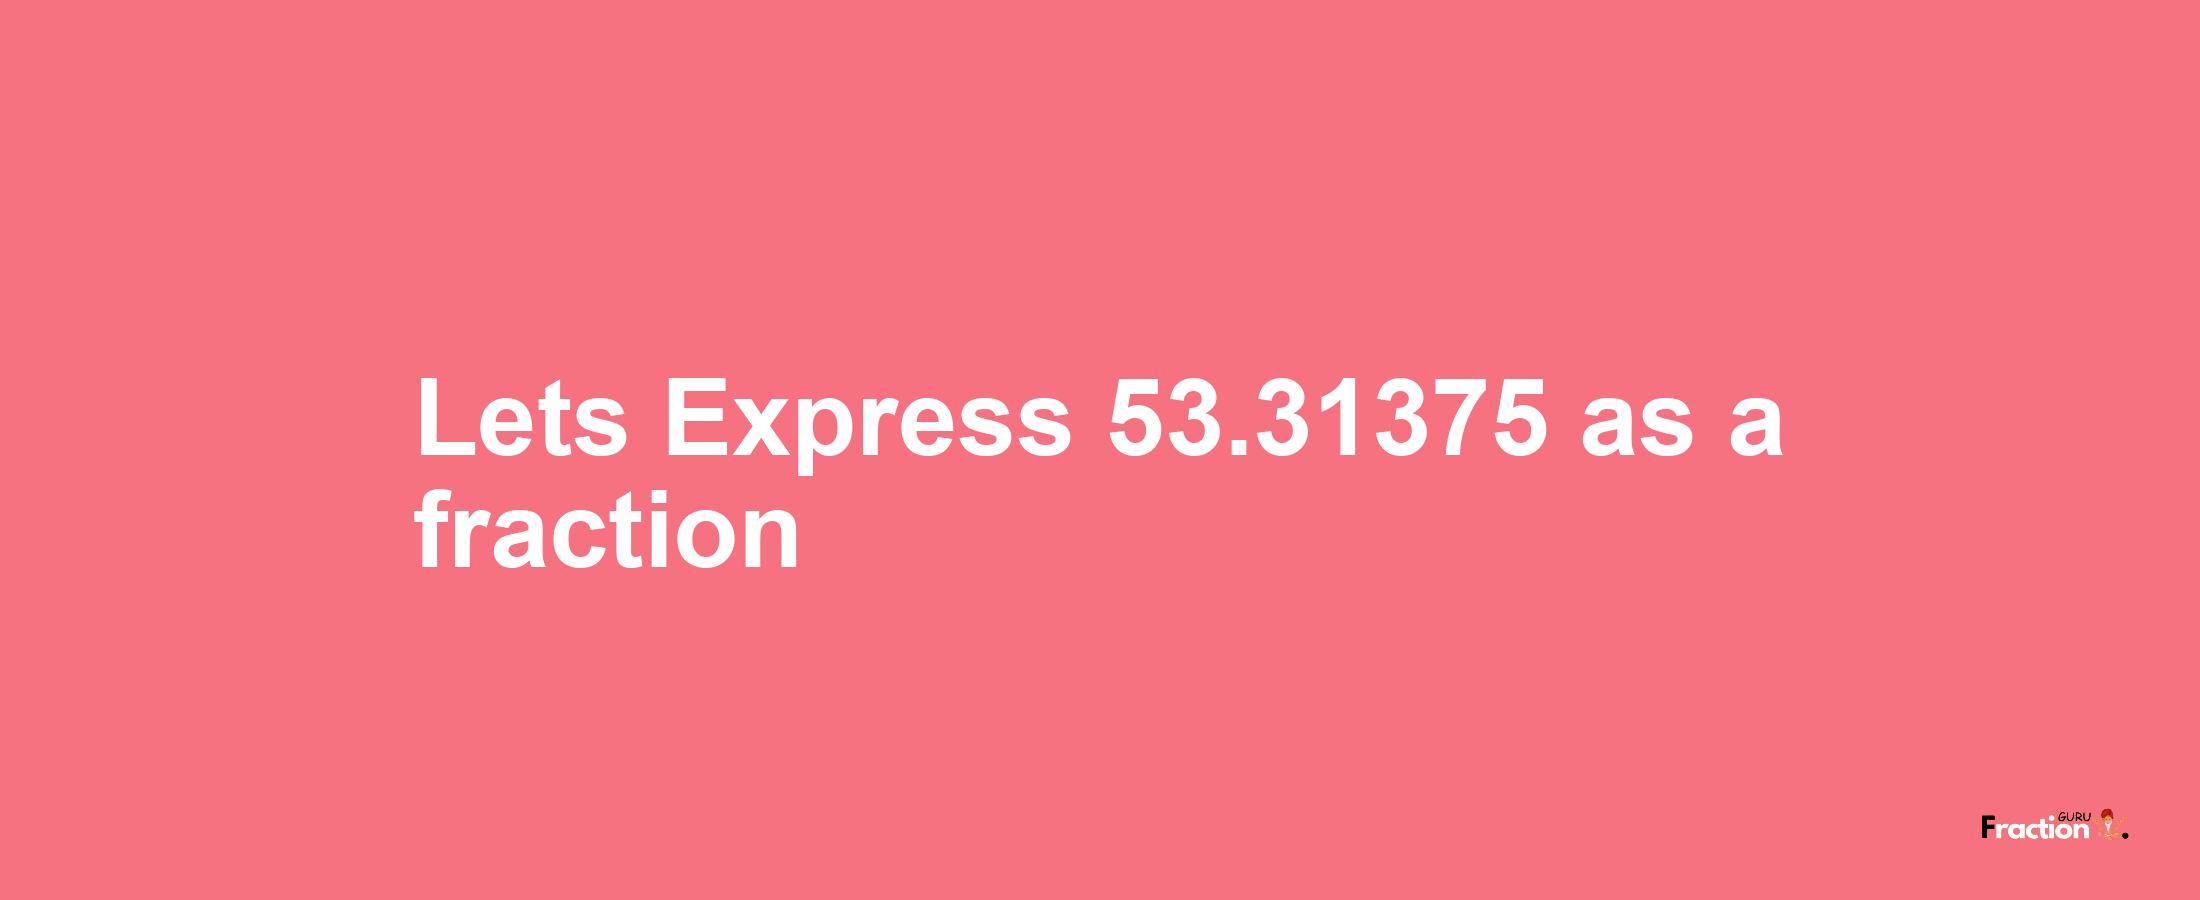 Lets Express 53.31375 as afraction